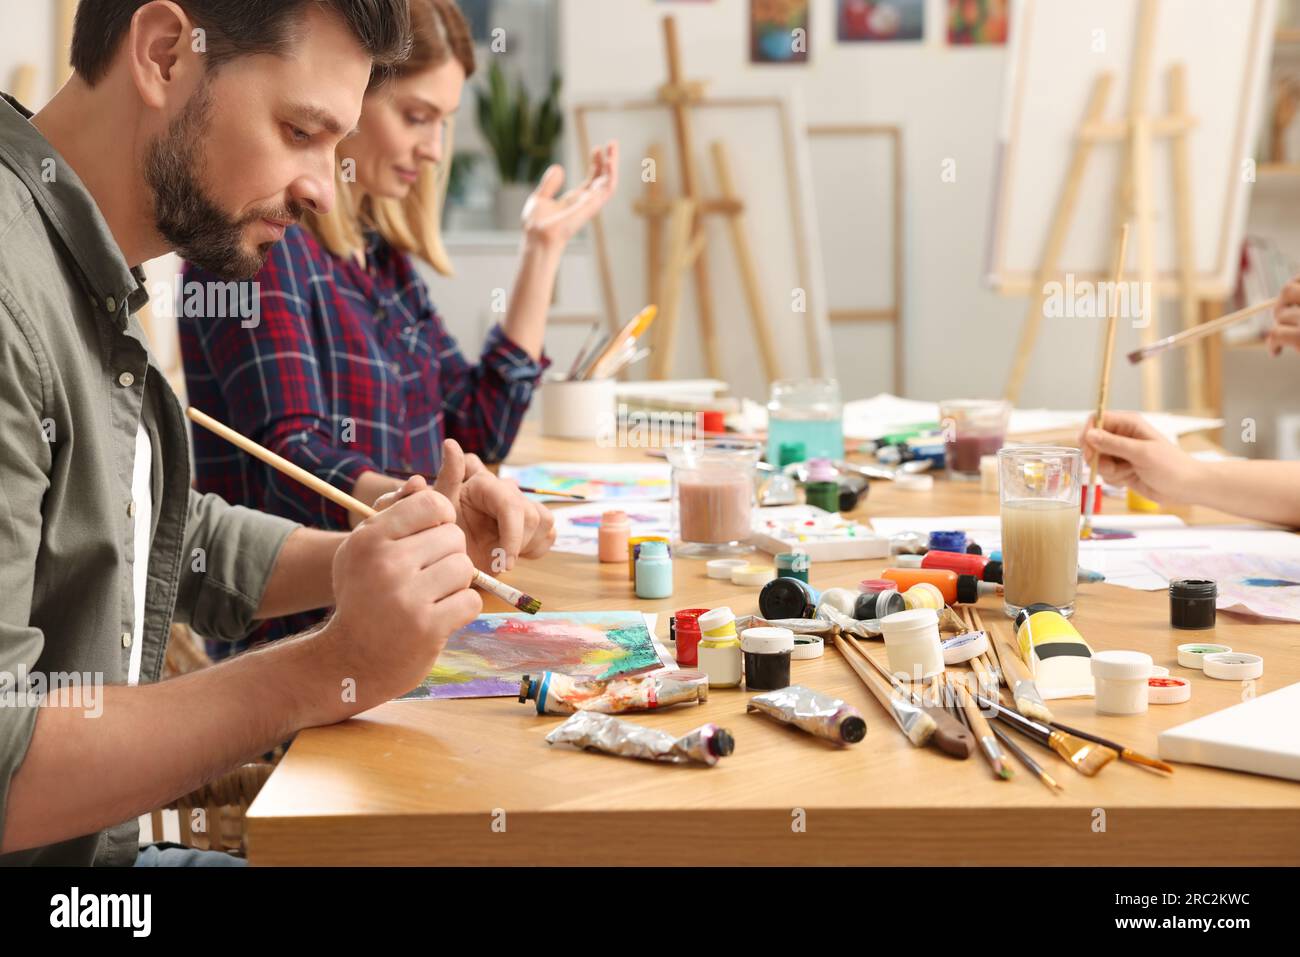 Students attending painting class in studio. Creative hobby Stock Photo